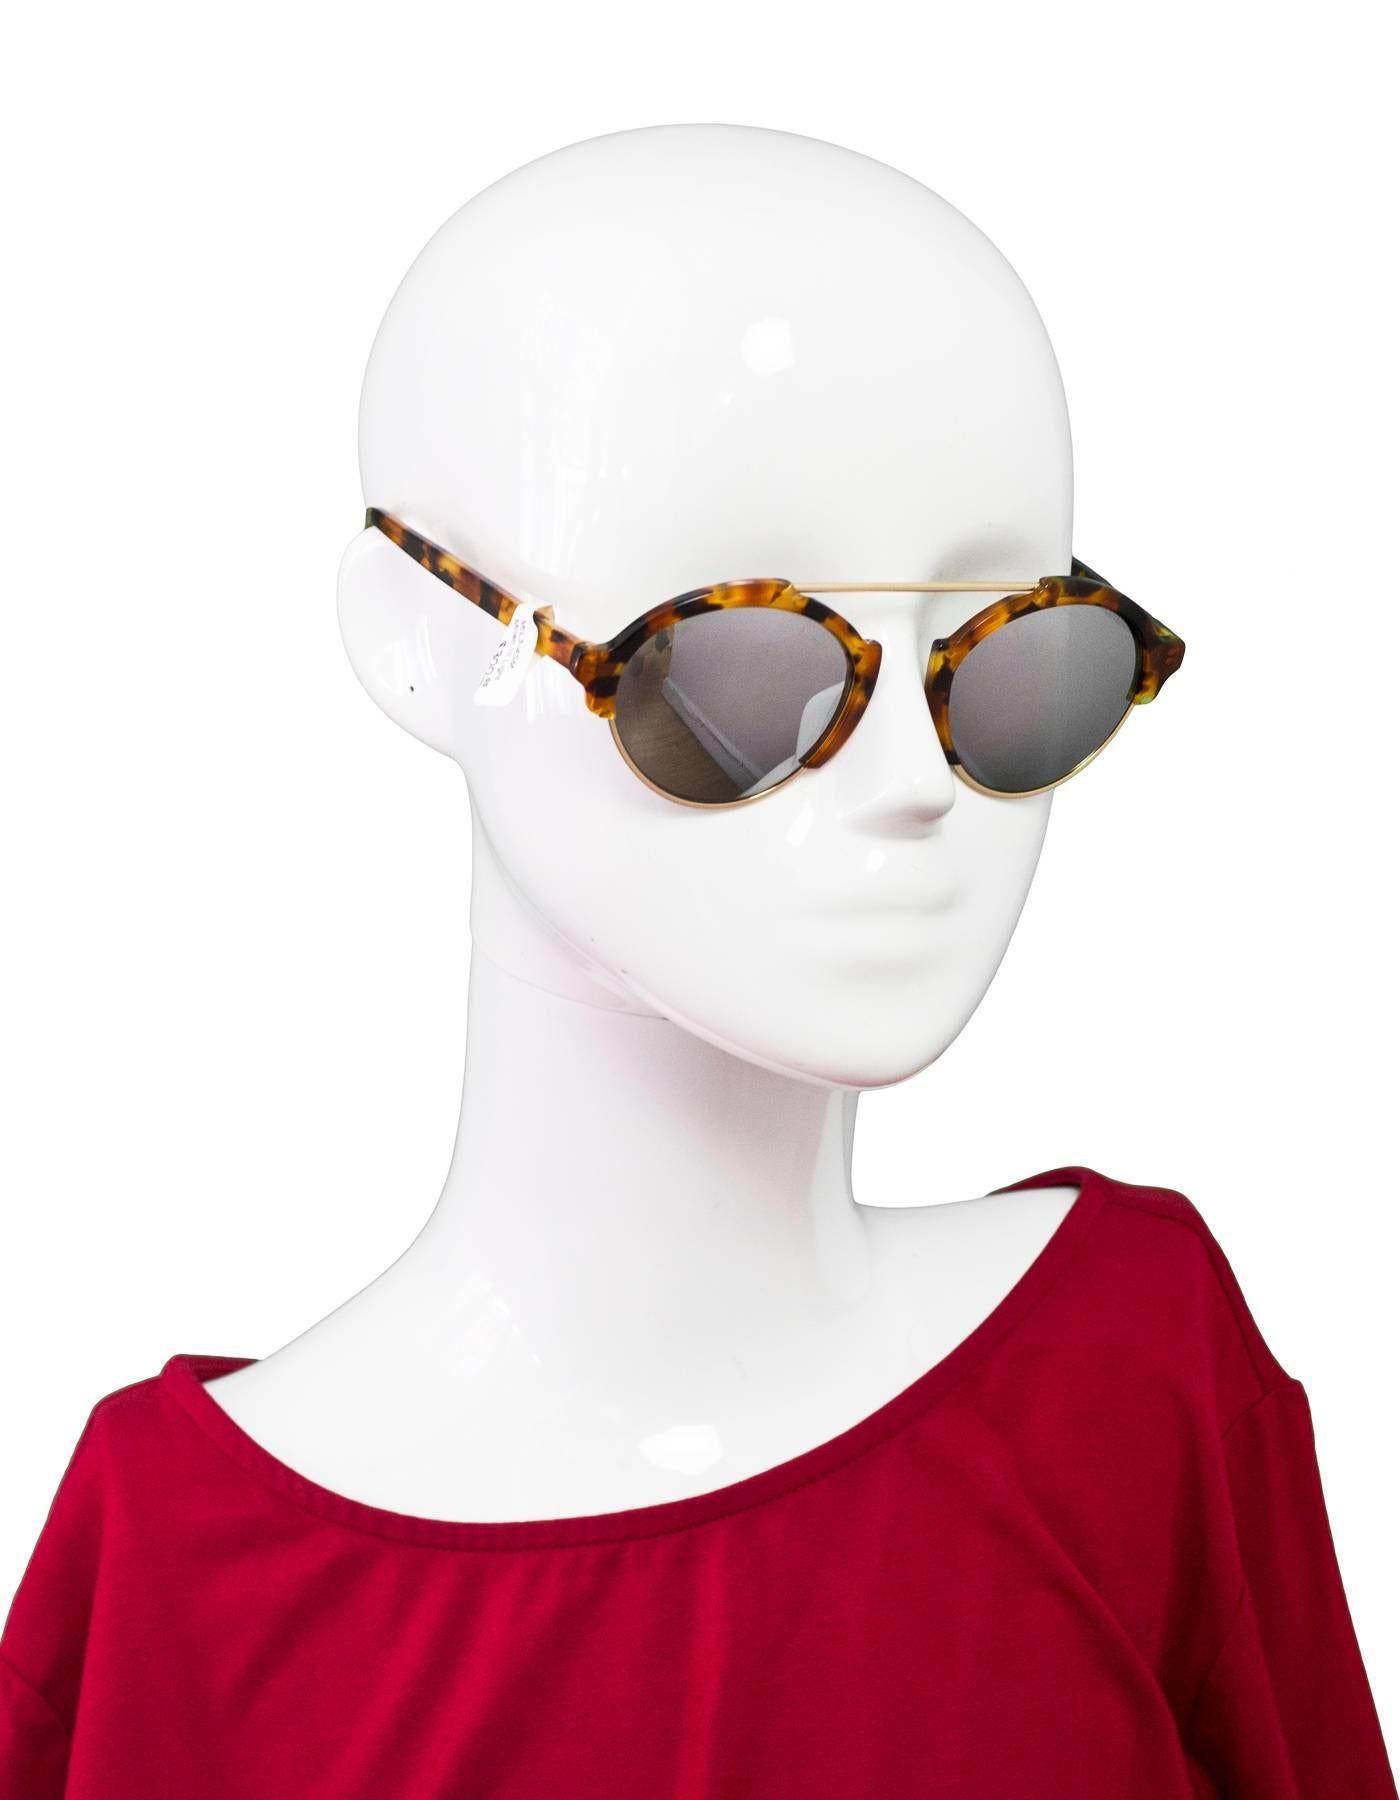 Illesteva Tortoise Mirrored Milan III Sunglasses

Made In: Italy
Color: Brown/tortoise
Materials: Resin, metal
Retail Price: $300 + tax
Overall Condition: Excellent pre-owned condition
Includes: Illesteva box and case

Measurements: 
Length Across: